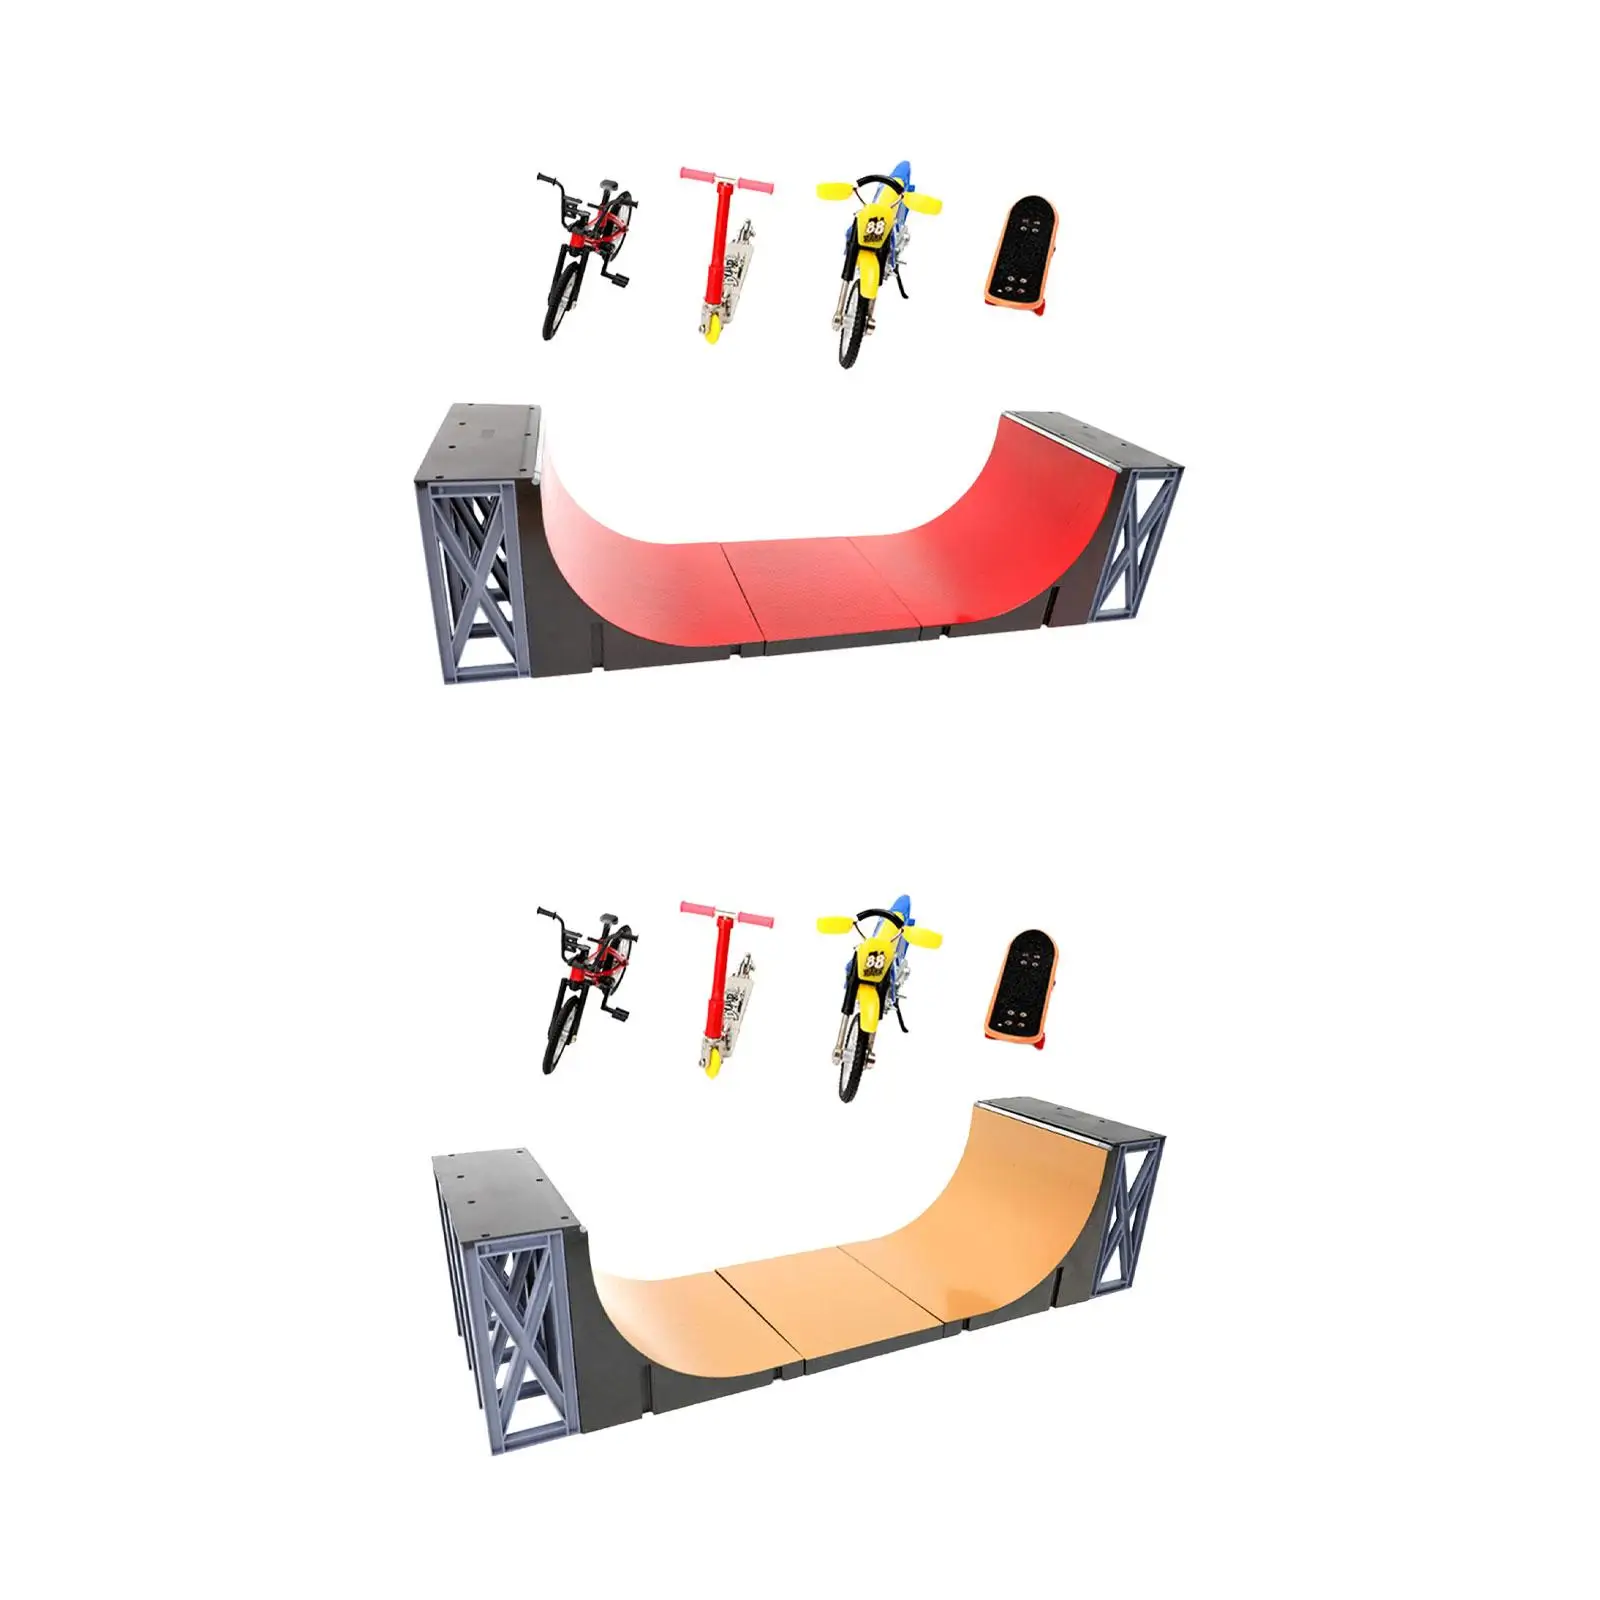 5 Pieces Fingerboard Skate Ramps, Early Educational Party Favors, Fingerboard Ramp Finger Set